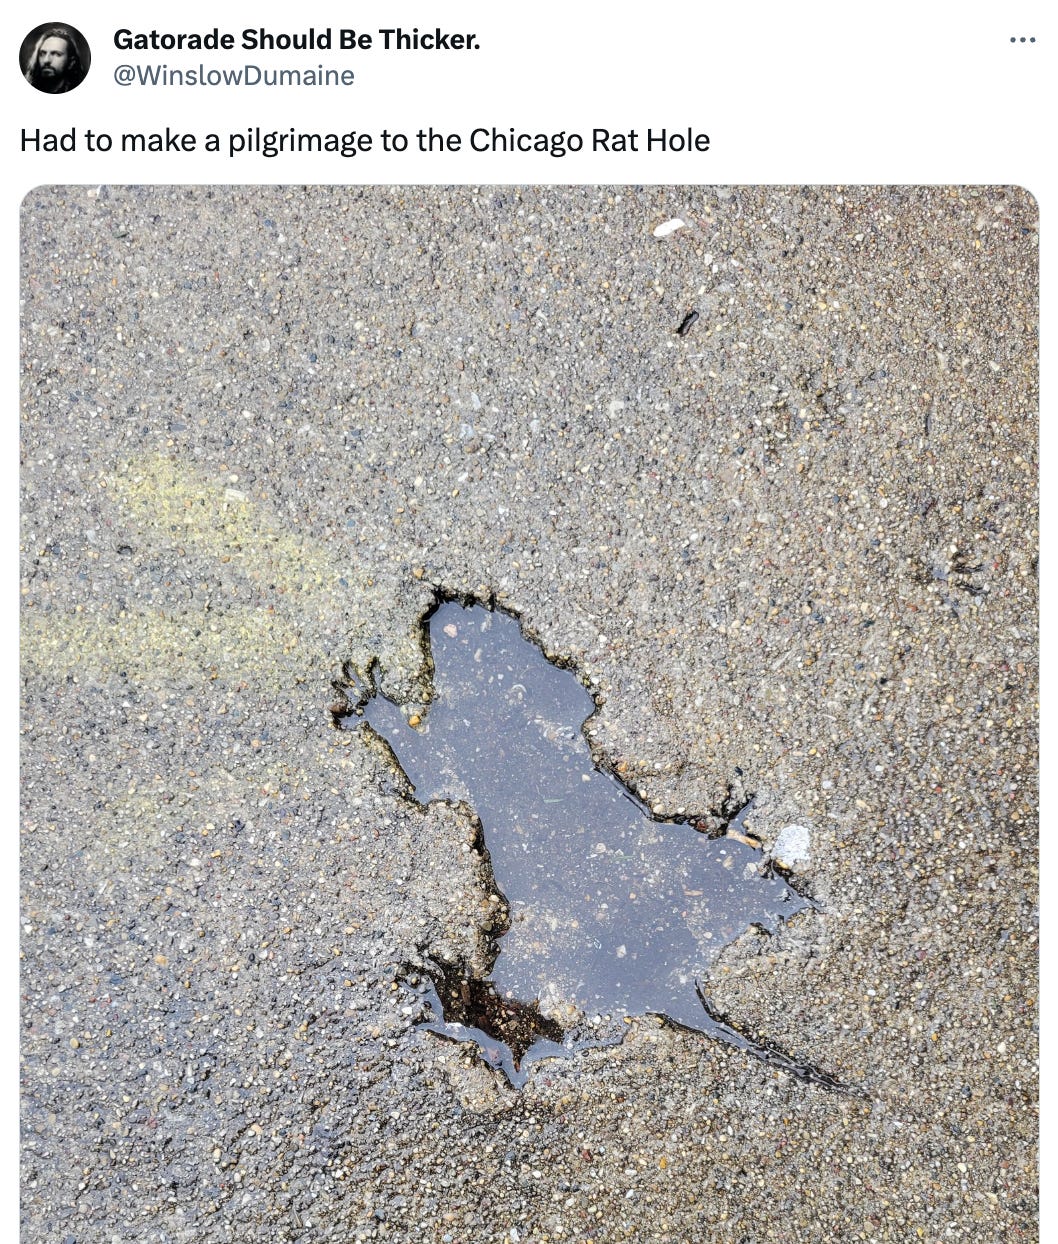 Tweet from @WinslowDumaine featuring the "rat hole", a spot in the sidewalk that looks like a rat got pressed into the wet concrete.